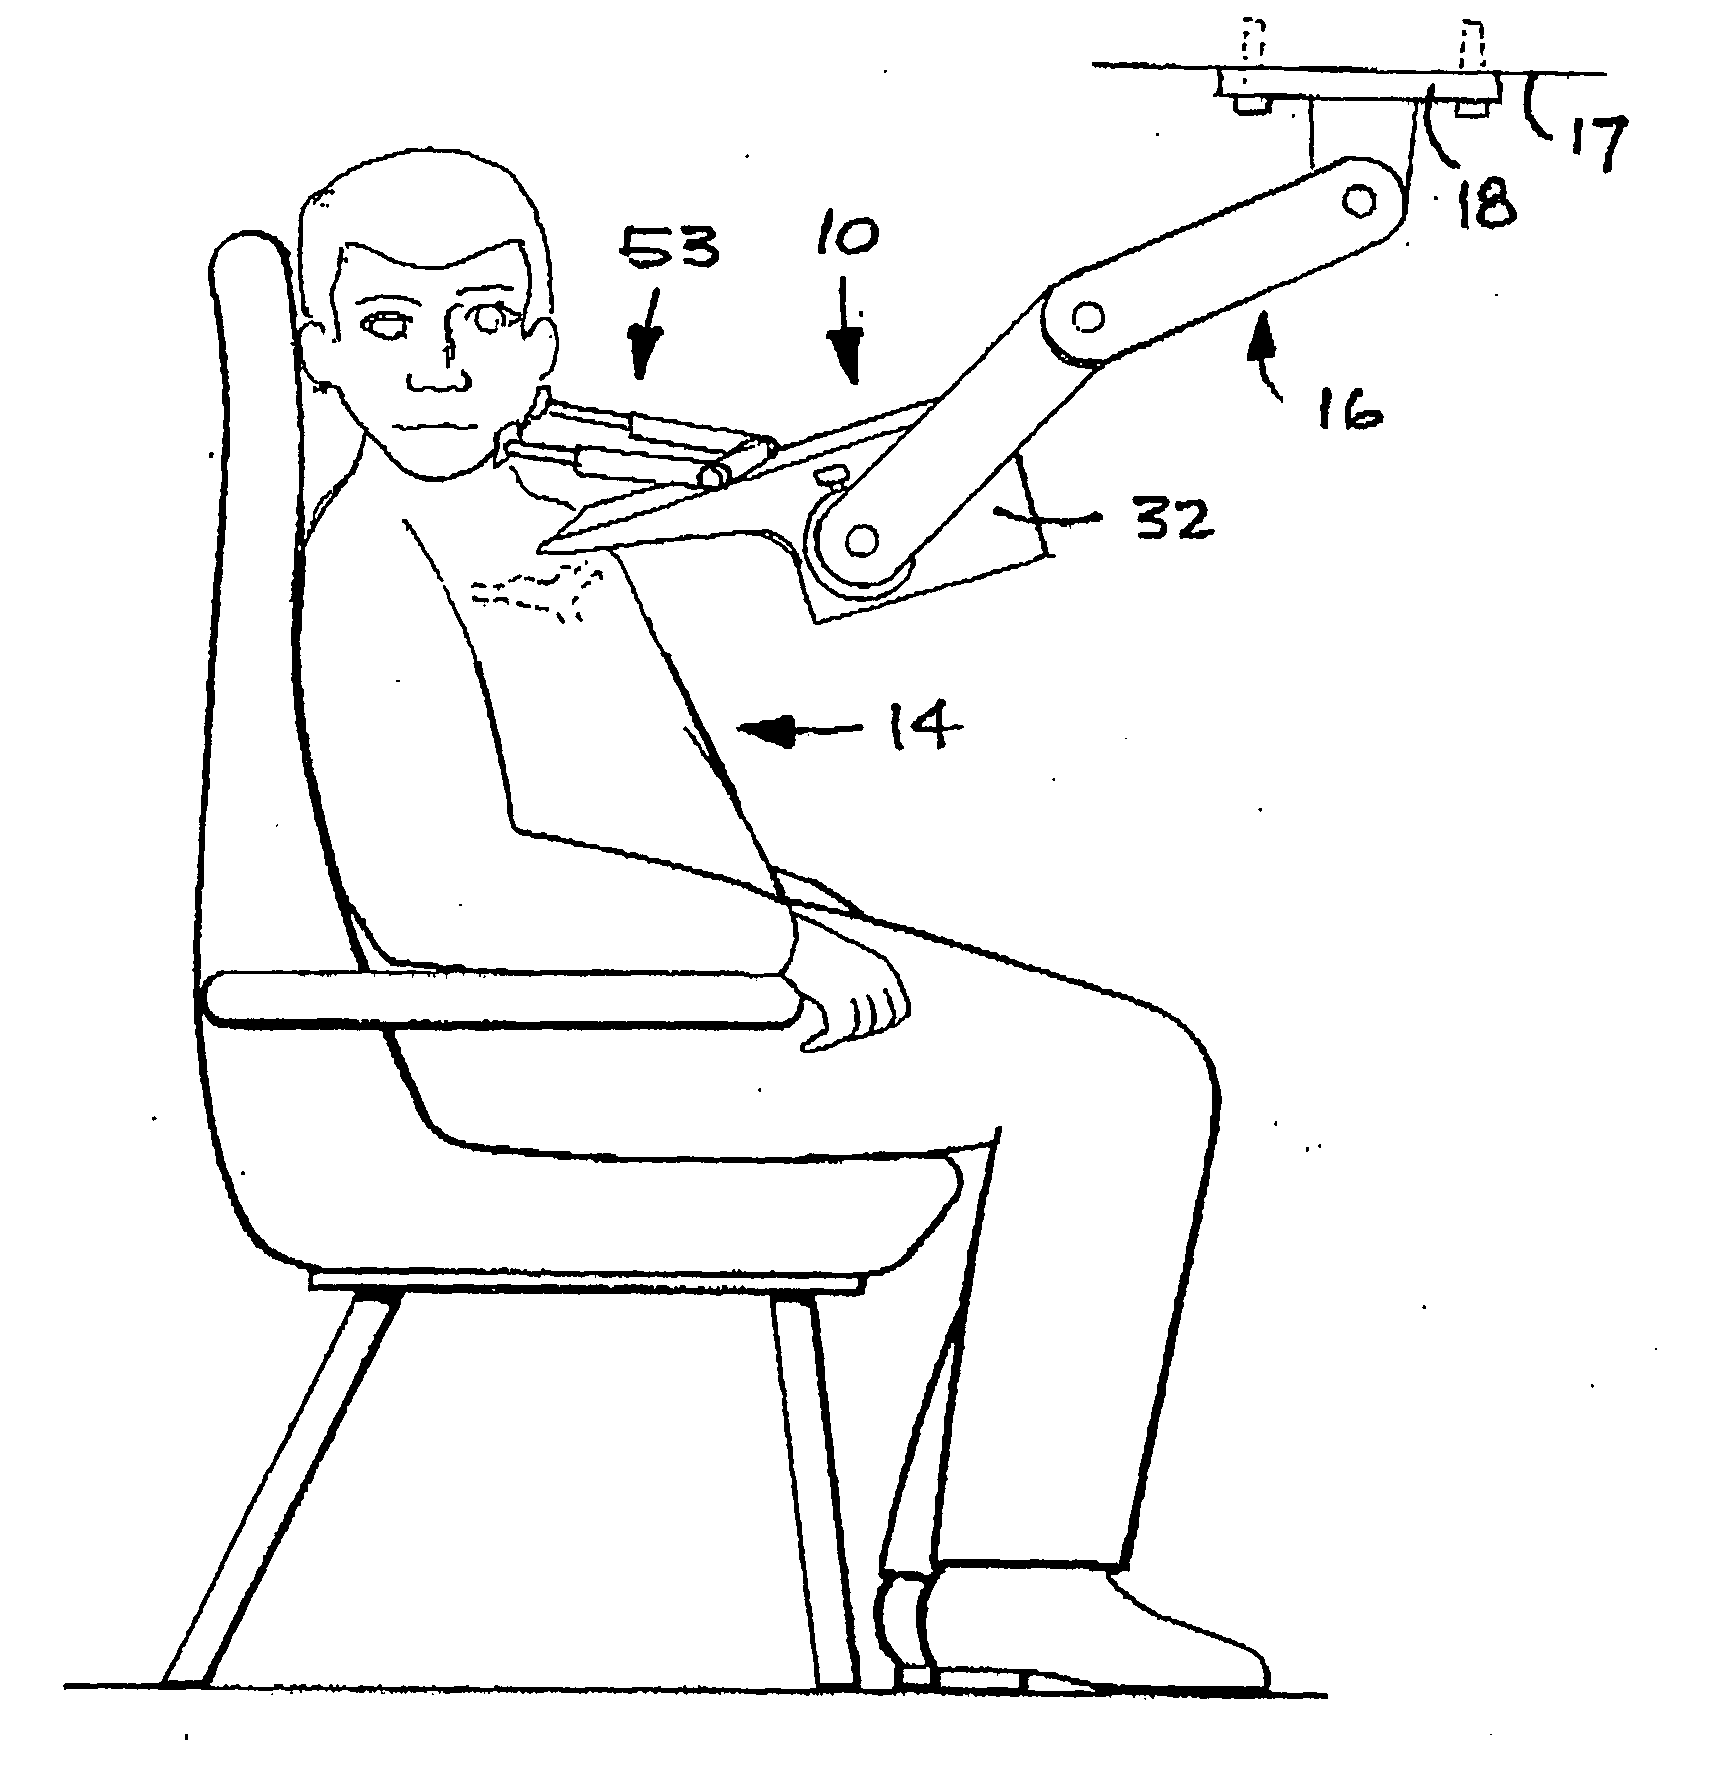 Methods of and apparatus for monitoring heart motions